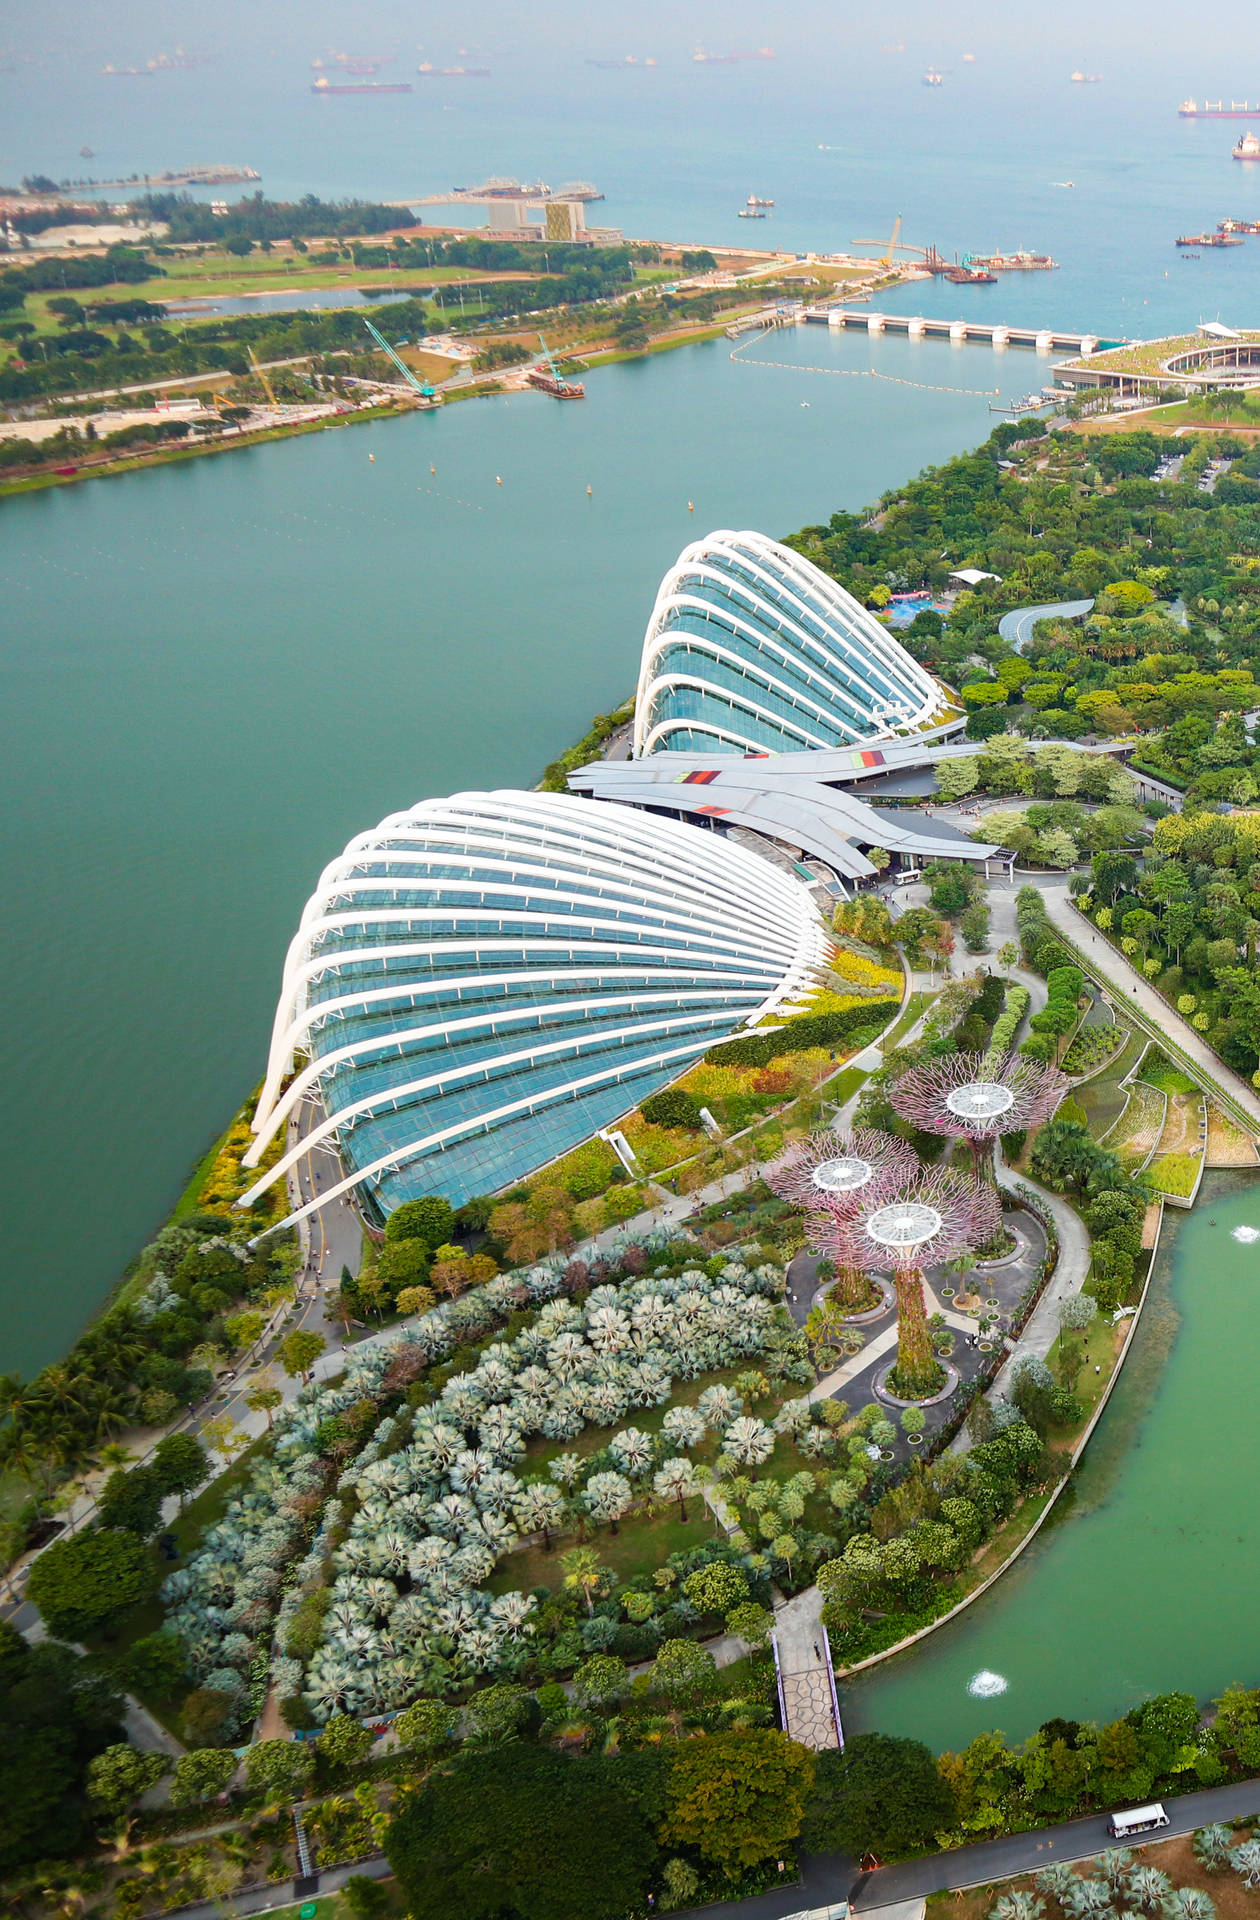 Singapore Flower Dome Aerial View